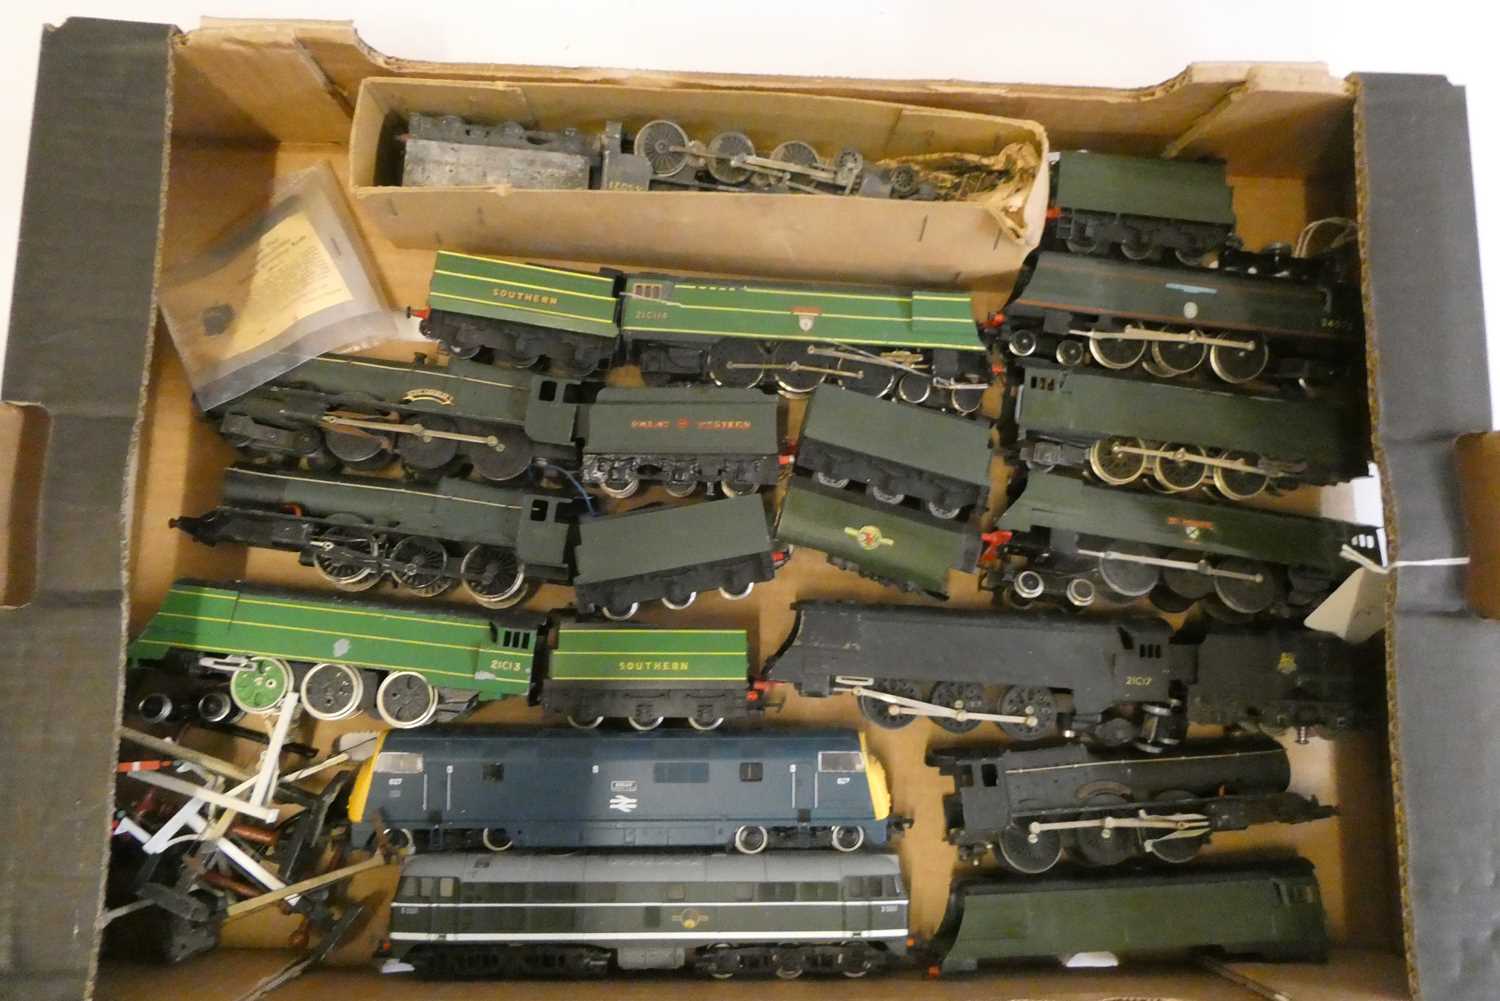 Unboxed locomotives by Graham Farish and Hornby Southern Railway West Country Class and Diesel